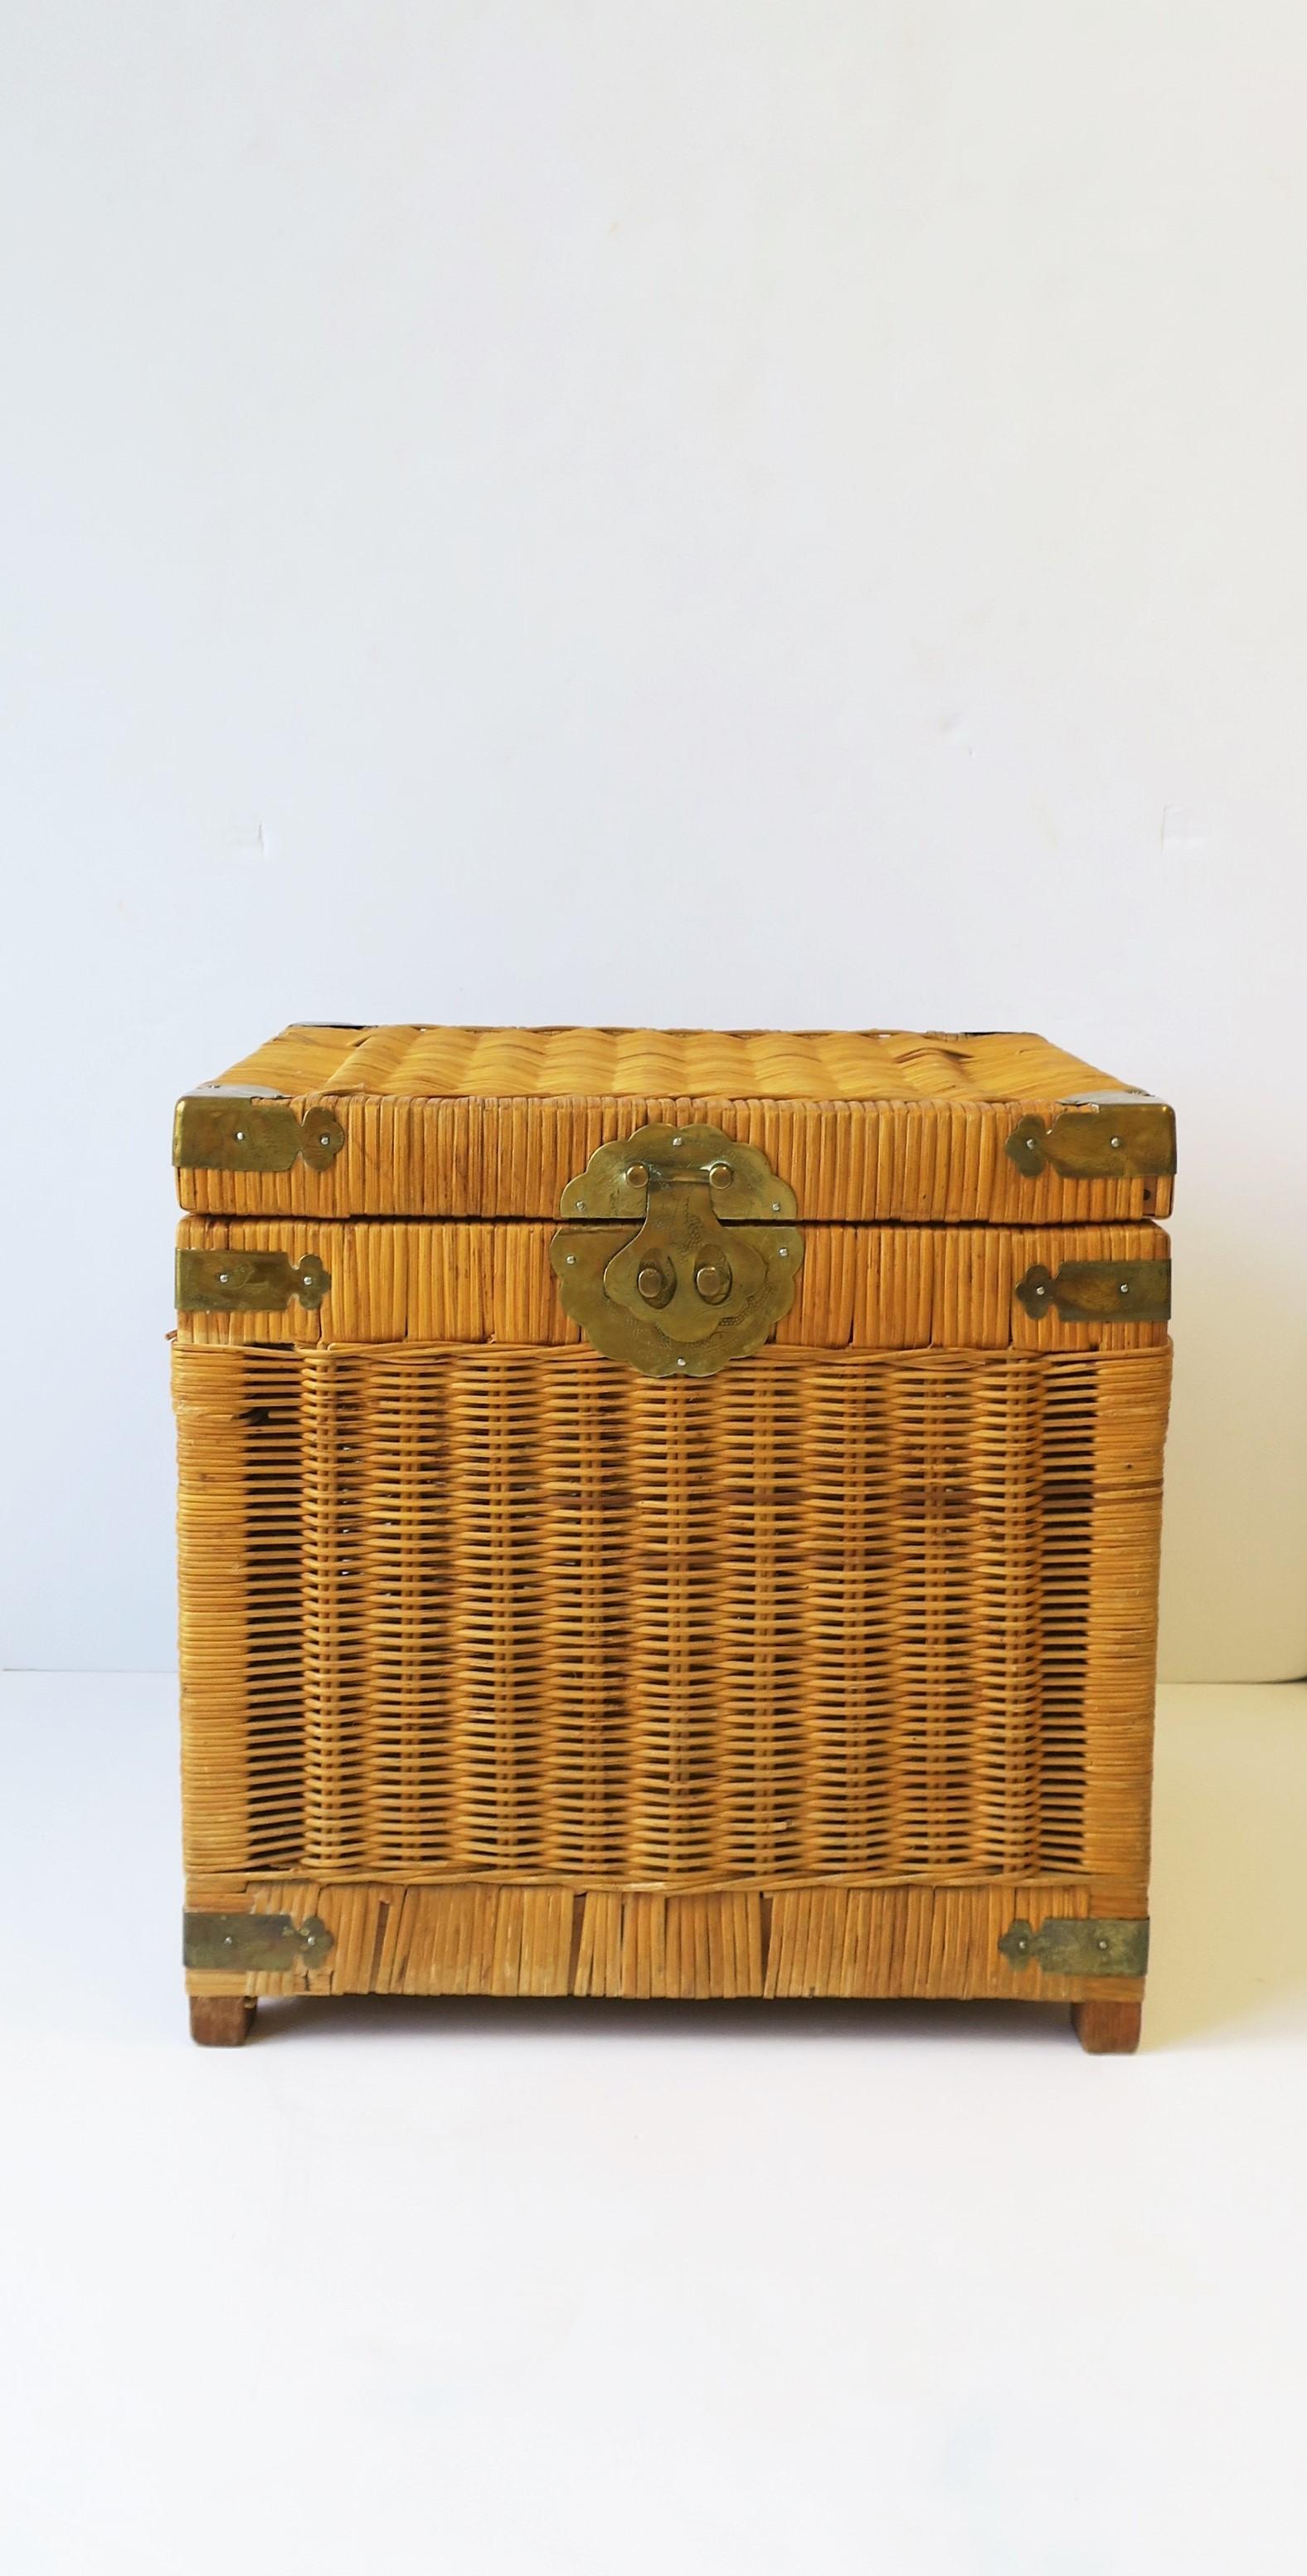 A vintage wicker and brass end table with storage, circa 1970s. This wicker end table 'box' with storage area has decorative brass front closure, corners, edges, and loop handles on two sides. Piece can work as an end or side table. 

Measures: